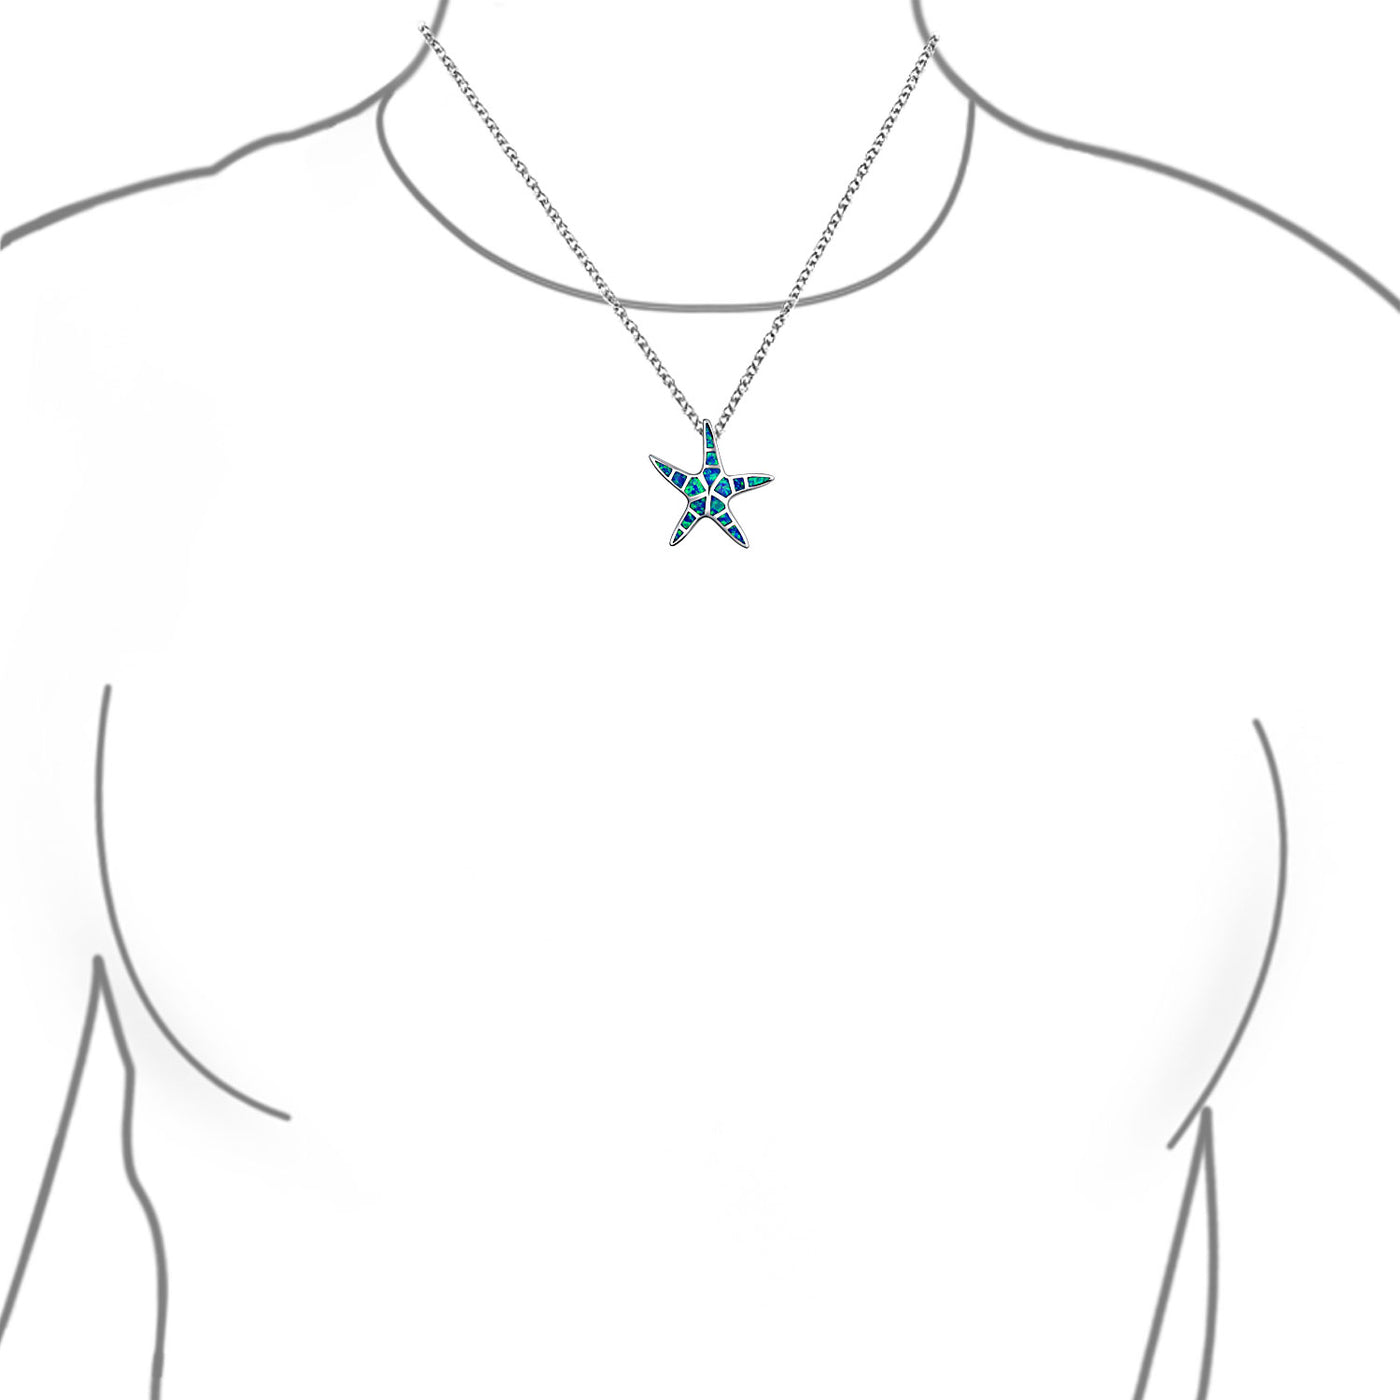 Starfish Pendant Blue Created Opal Necklace .925 Sterling Silver Chain ...